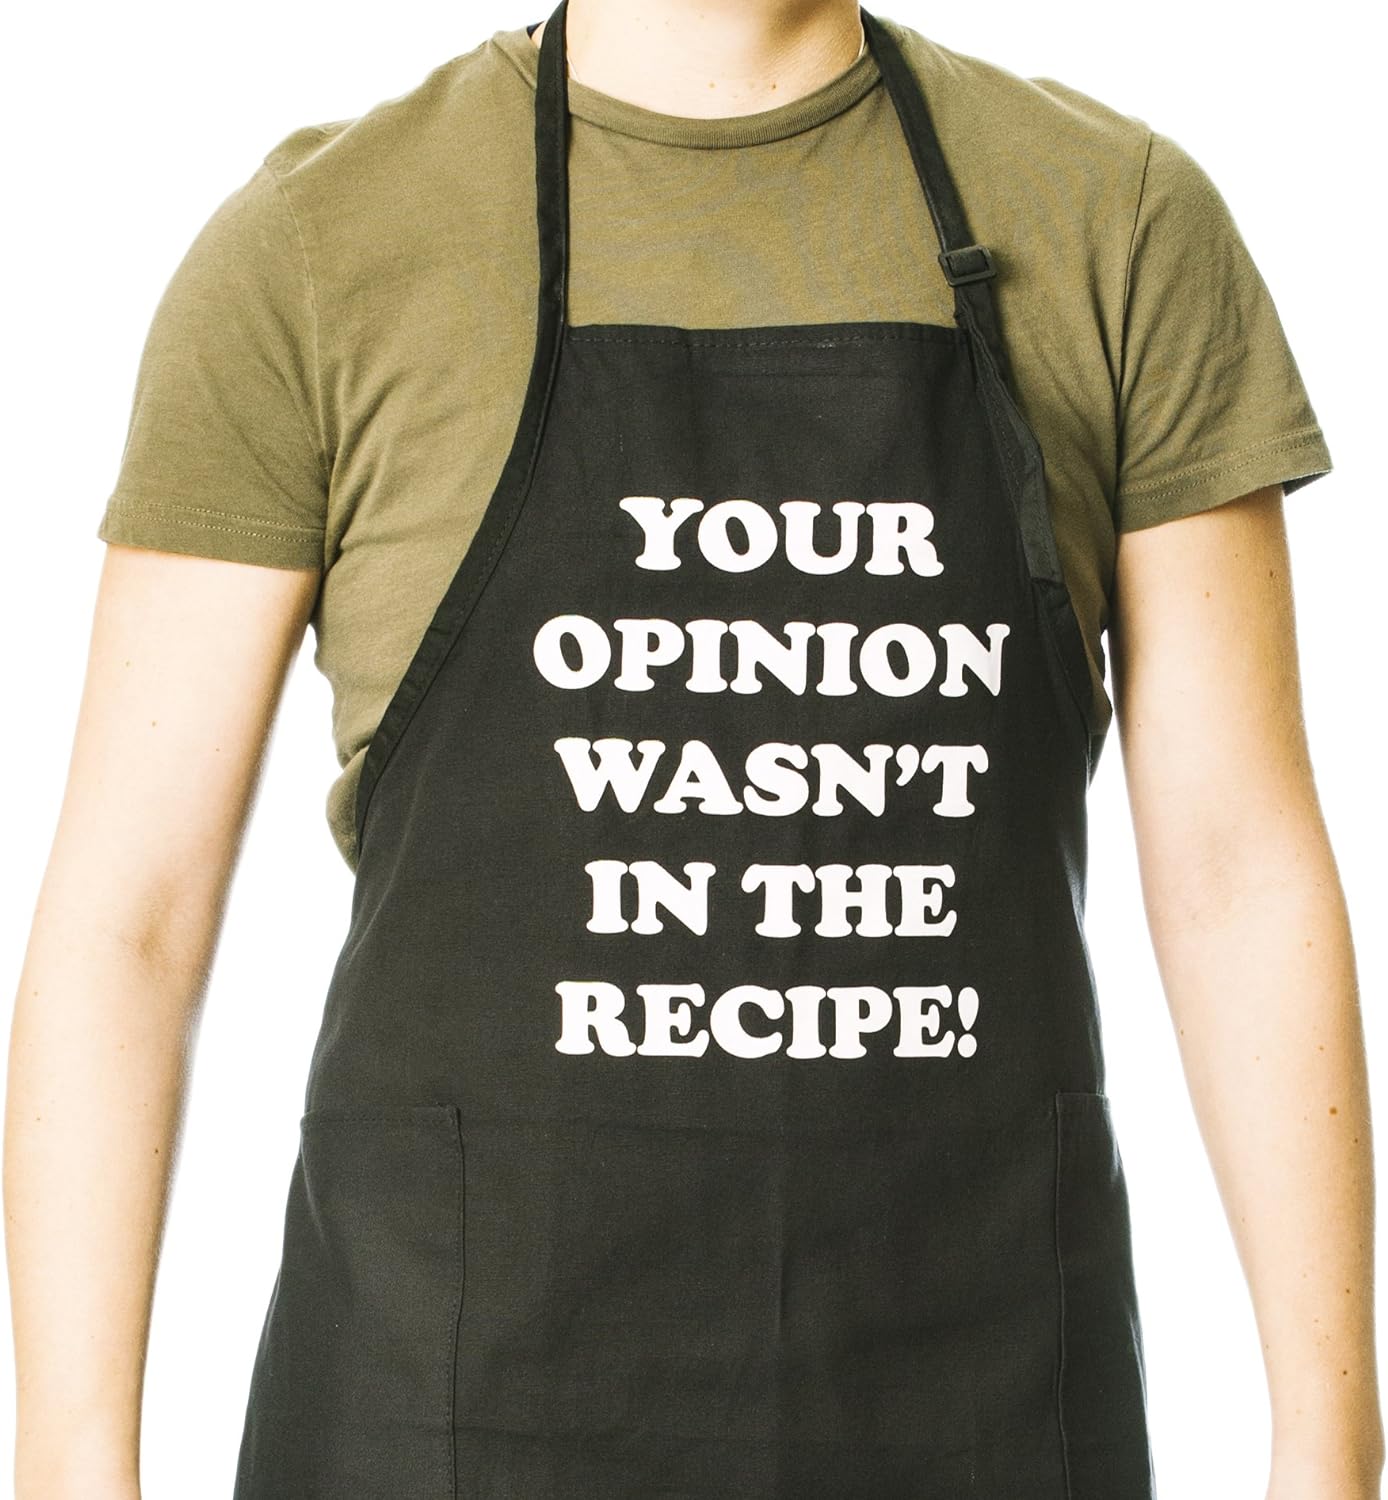 Your Opinion Wasn't In The Recipe Adjustable Apron with Pockets - Funny Apron for Men and Women - Perfect For Kitchen BBQ Grilling Barbecue Cooking Baking Crafting Gardening